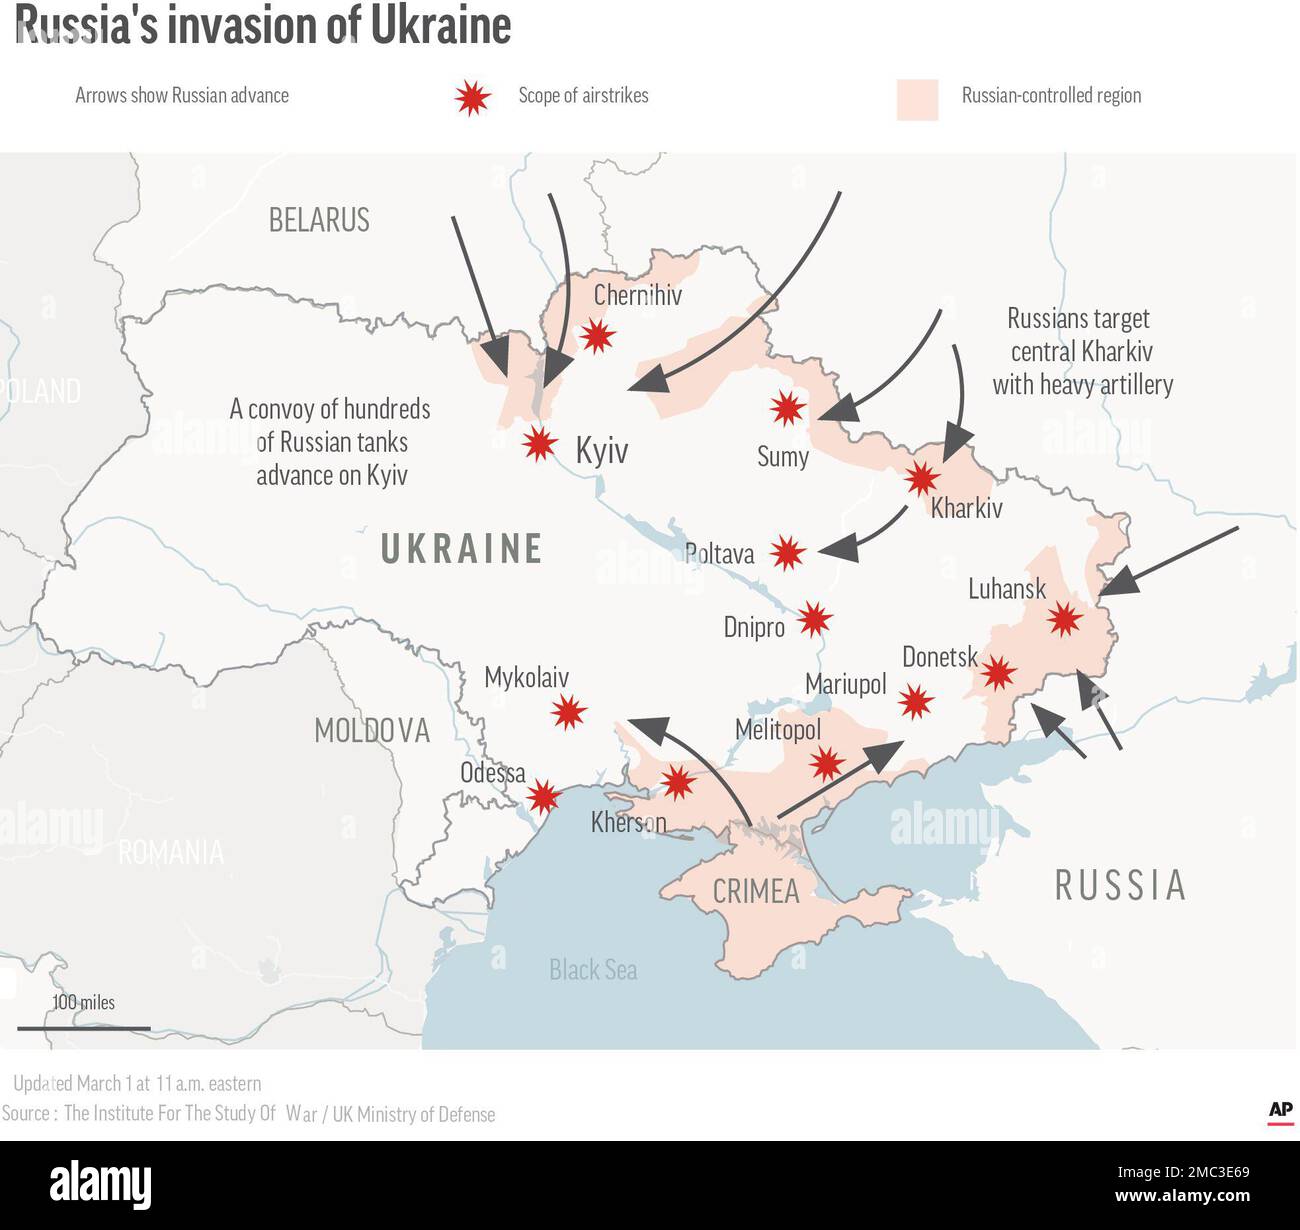 The following map shows the locations of known Russian military and ground attacks inside Ukraine after Russia a military invasion of Ukraine. information in this map is current as